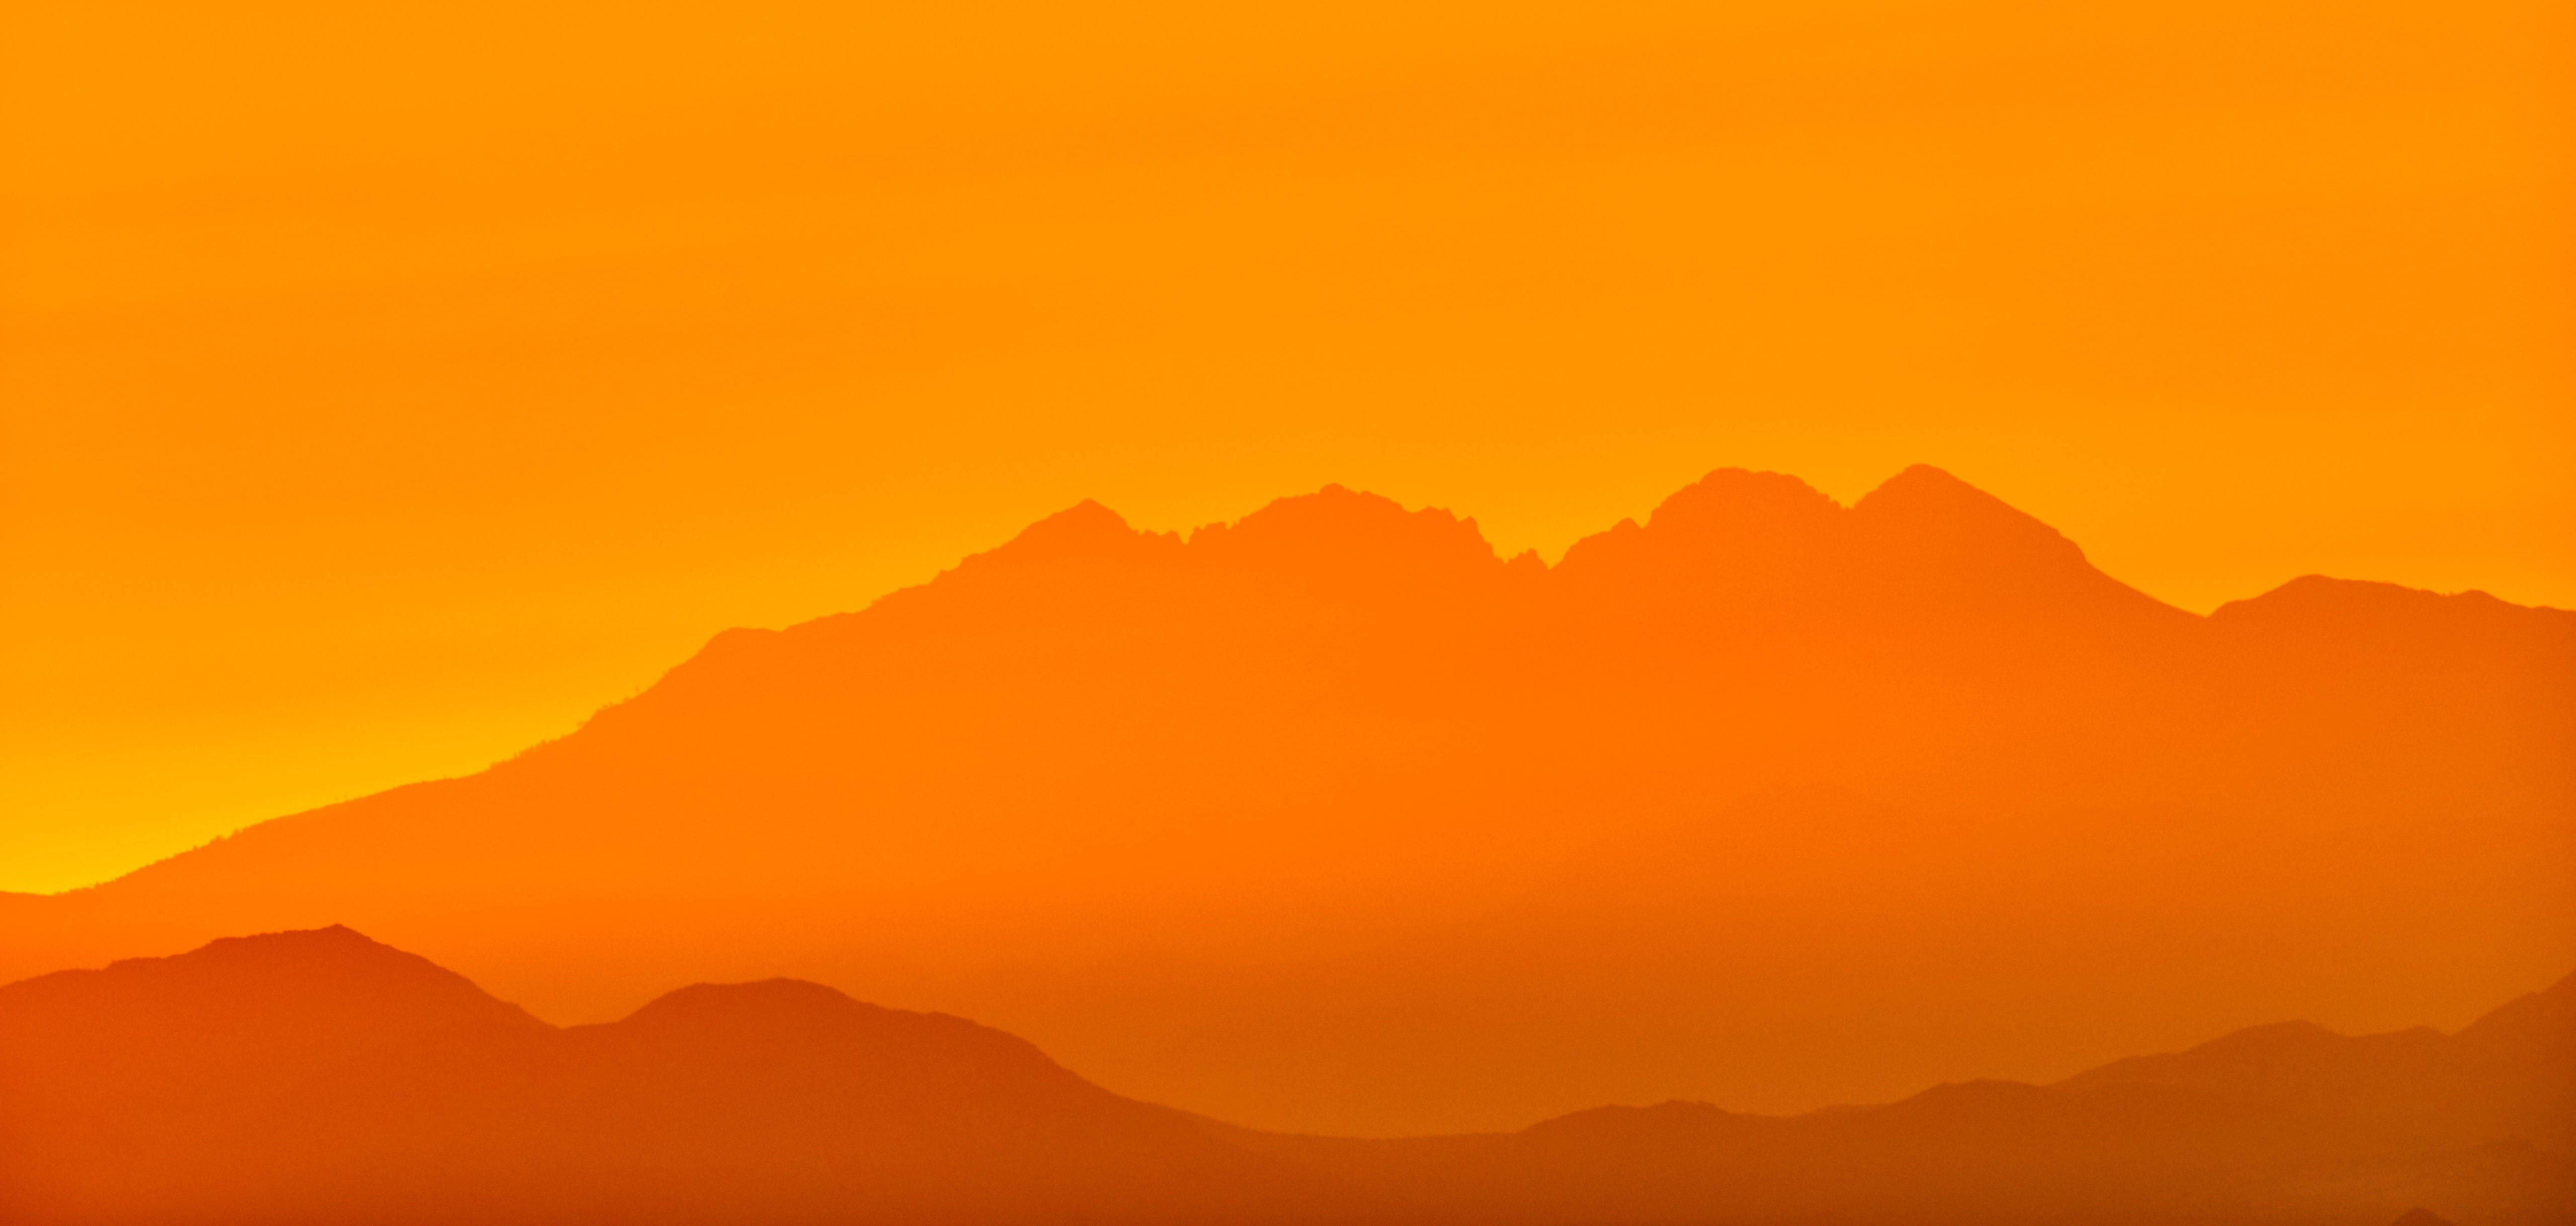 130206 free download Orange wallpapers for phone, silhouette, mountains, nature, rocks Orange images and screensavers for mobile